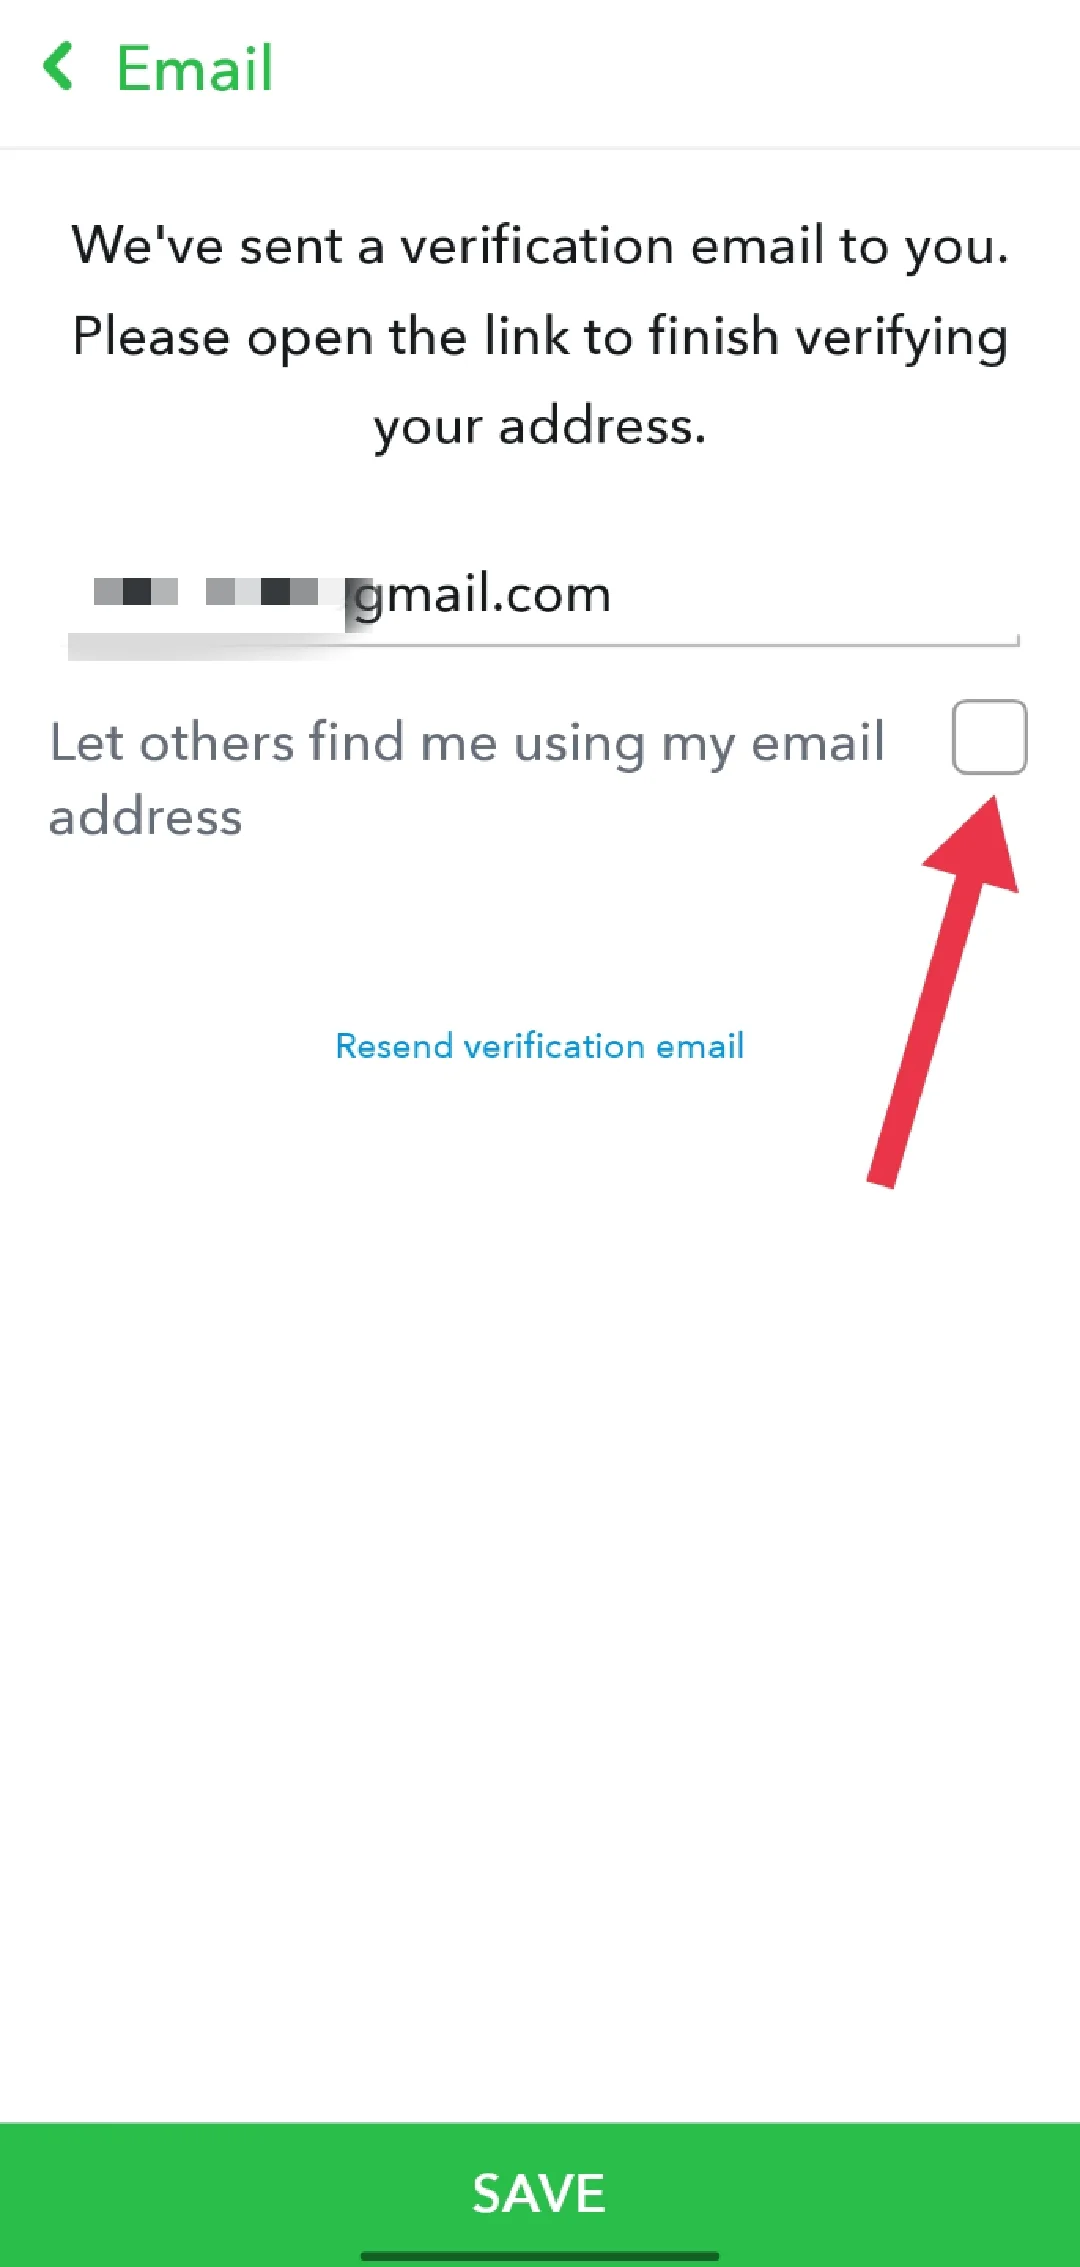 Let others find me using my email address on Snapchat